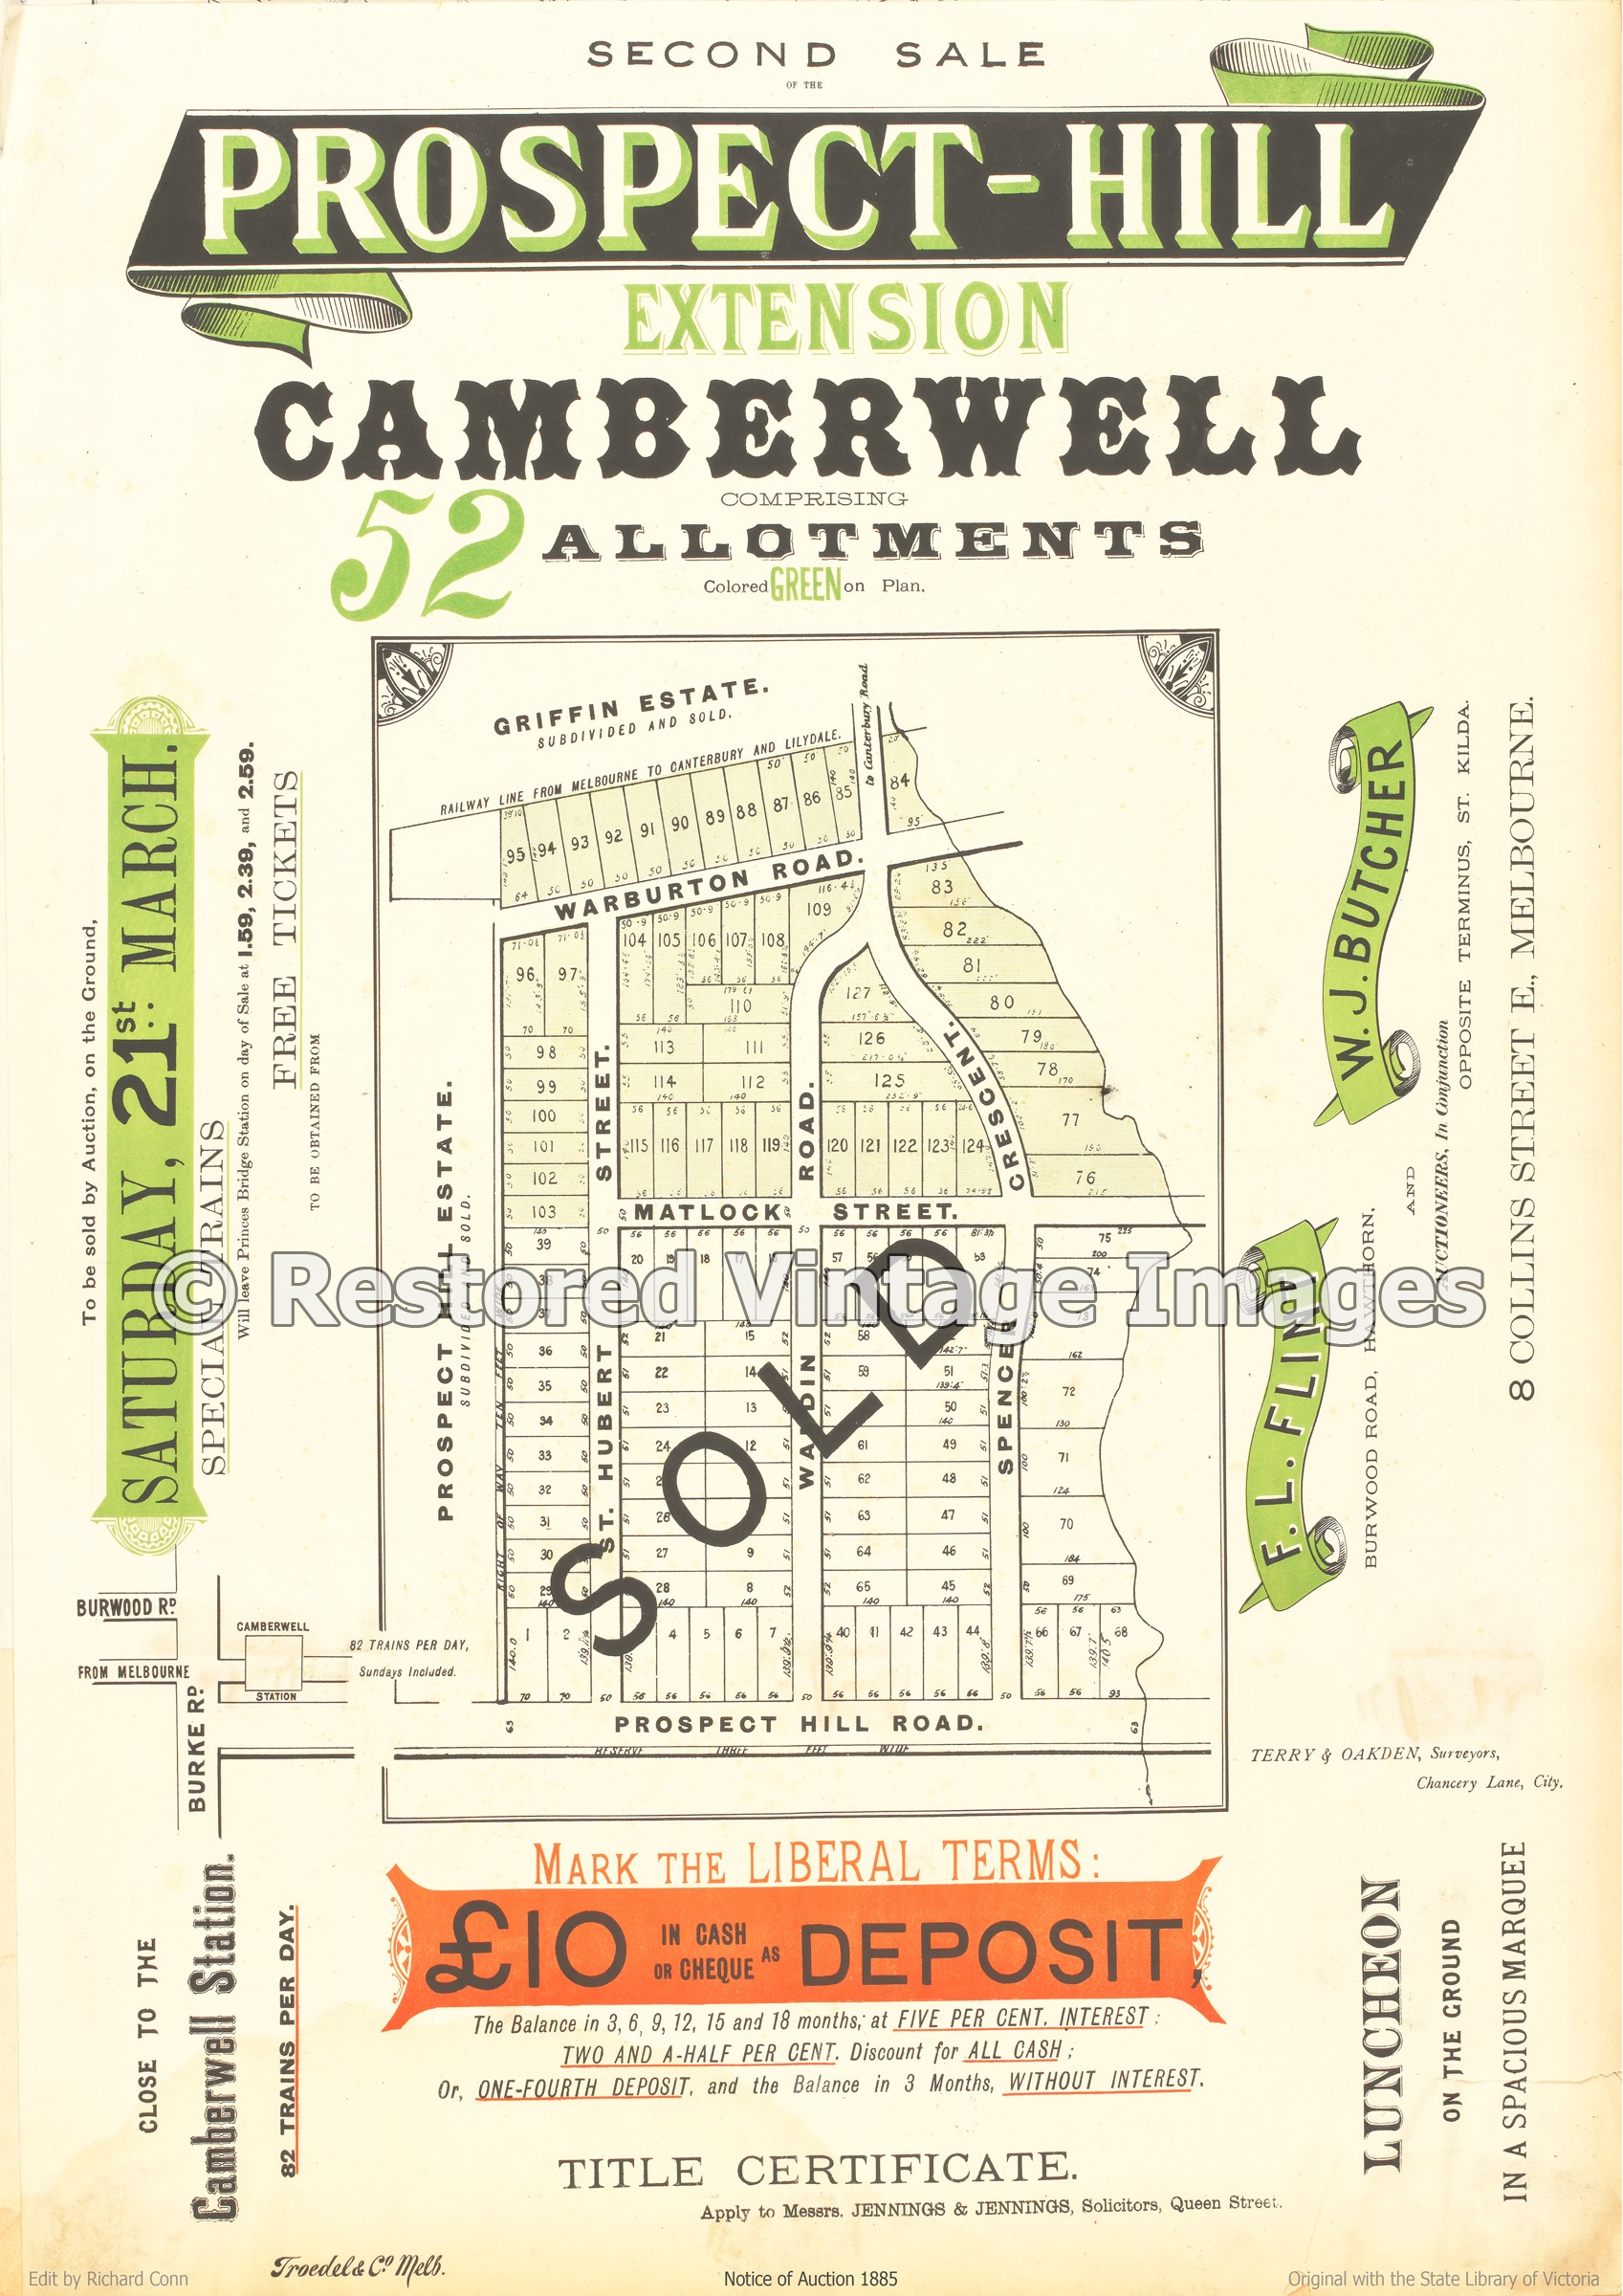 Prospect-Hill Extension Second Sale 1885 – Camberwell